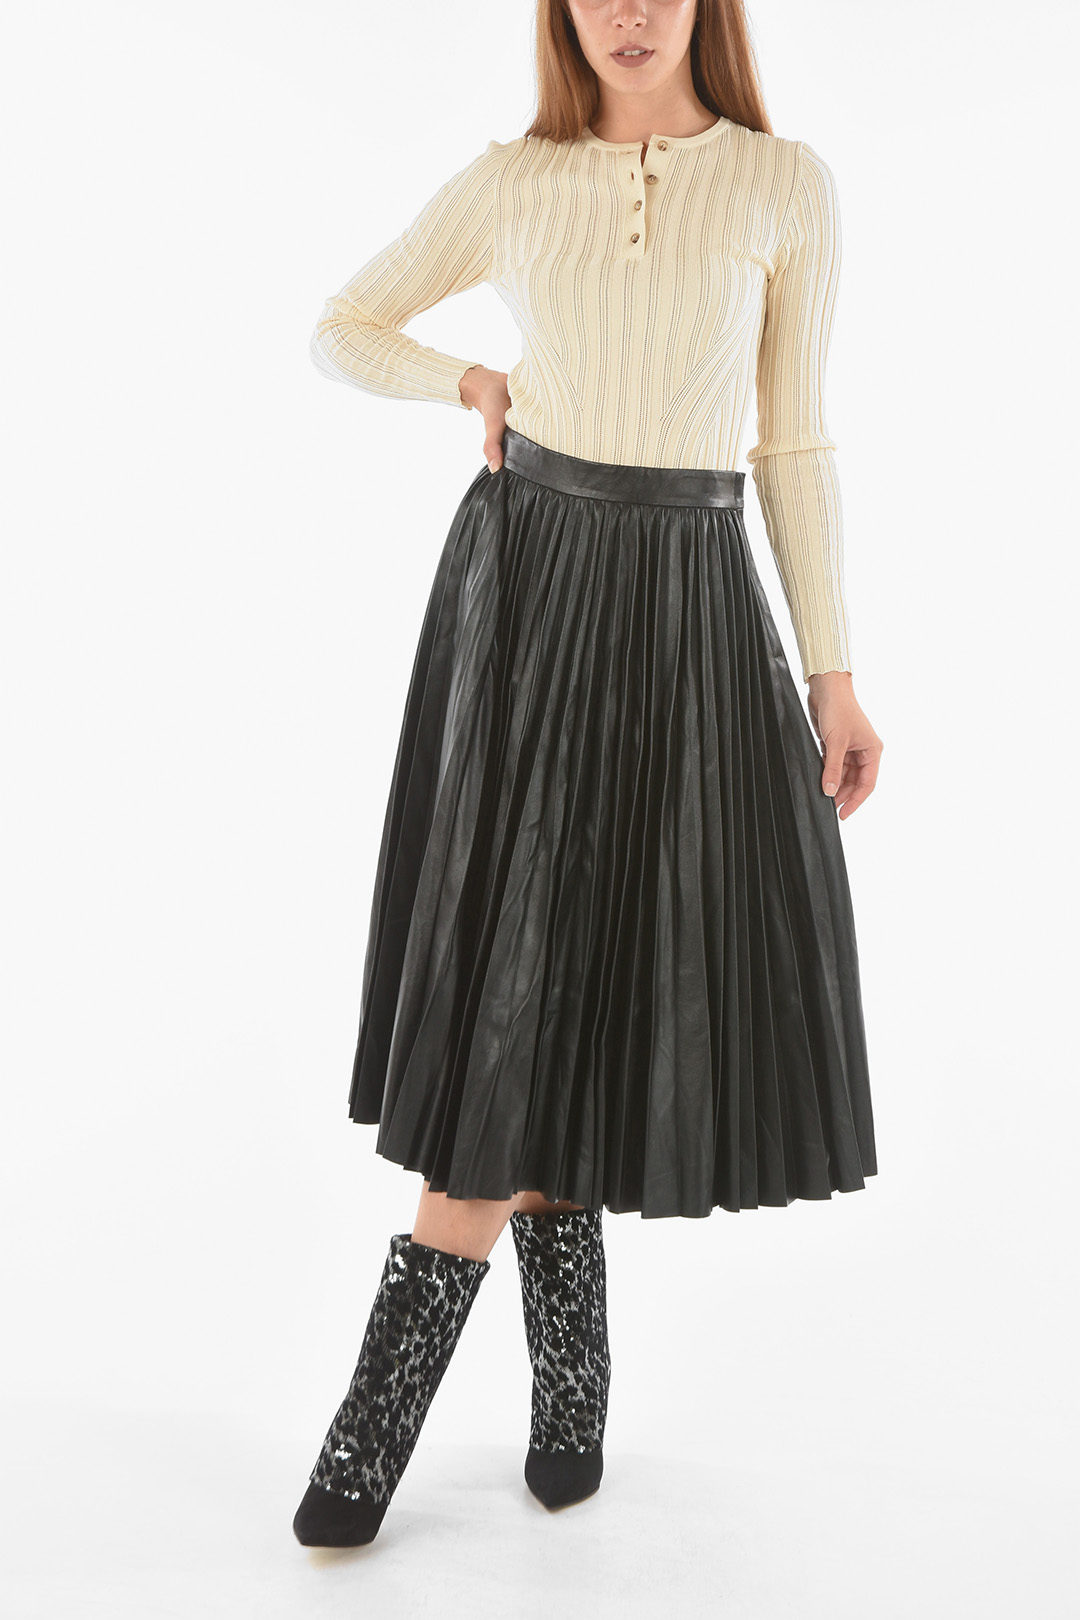 Red Valentino Pleated Accordion Leather Skirt - Glamood Outlet